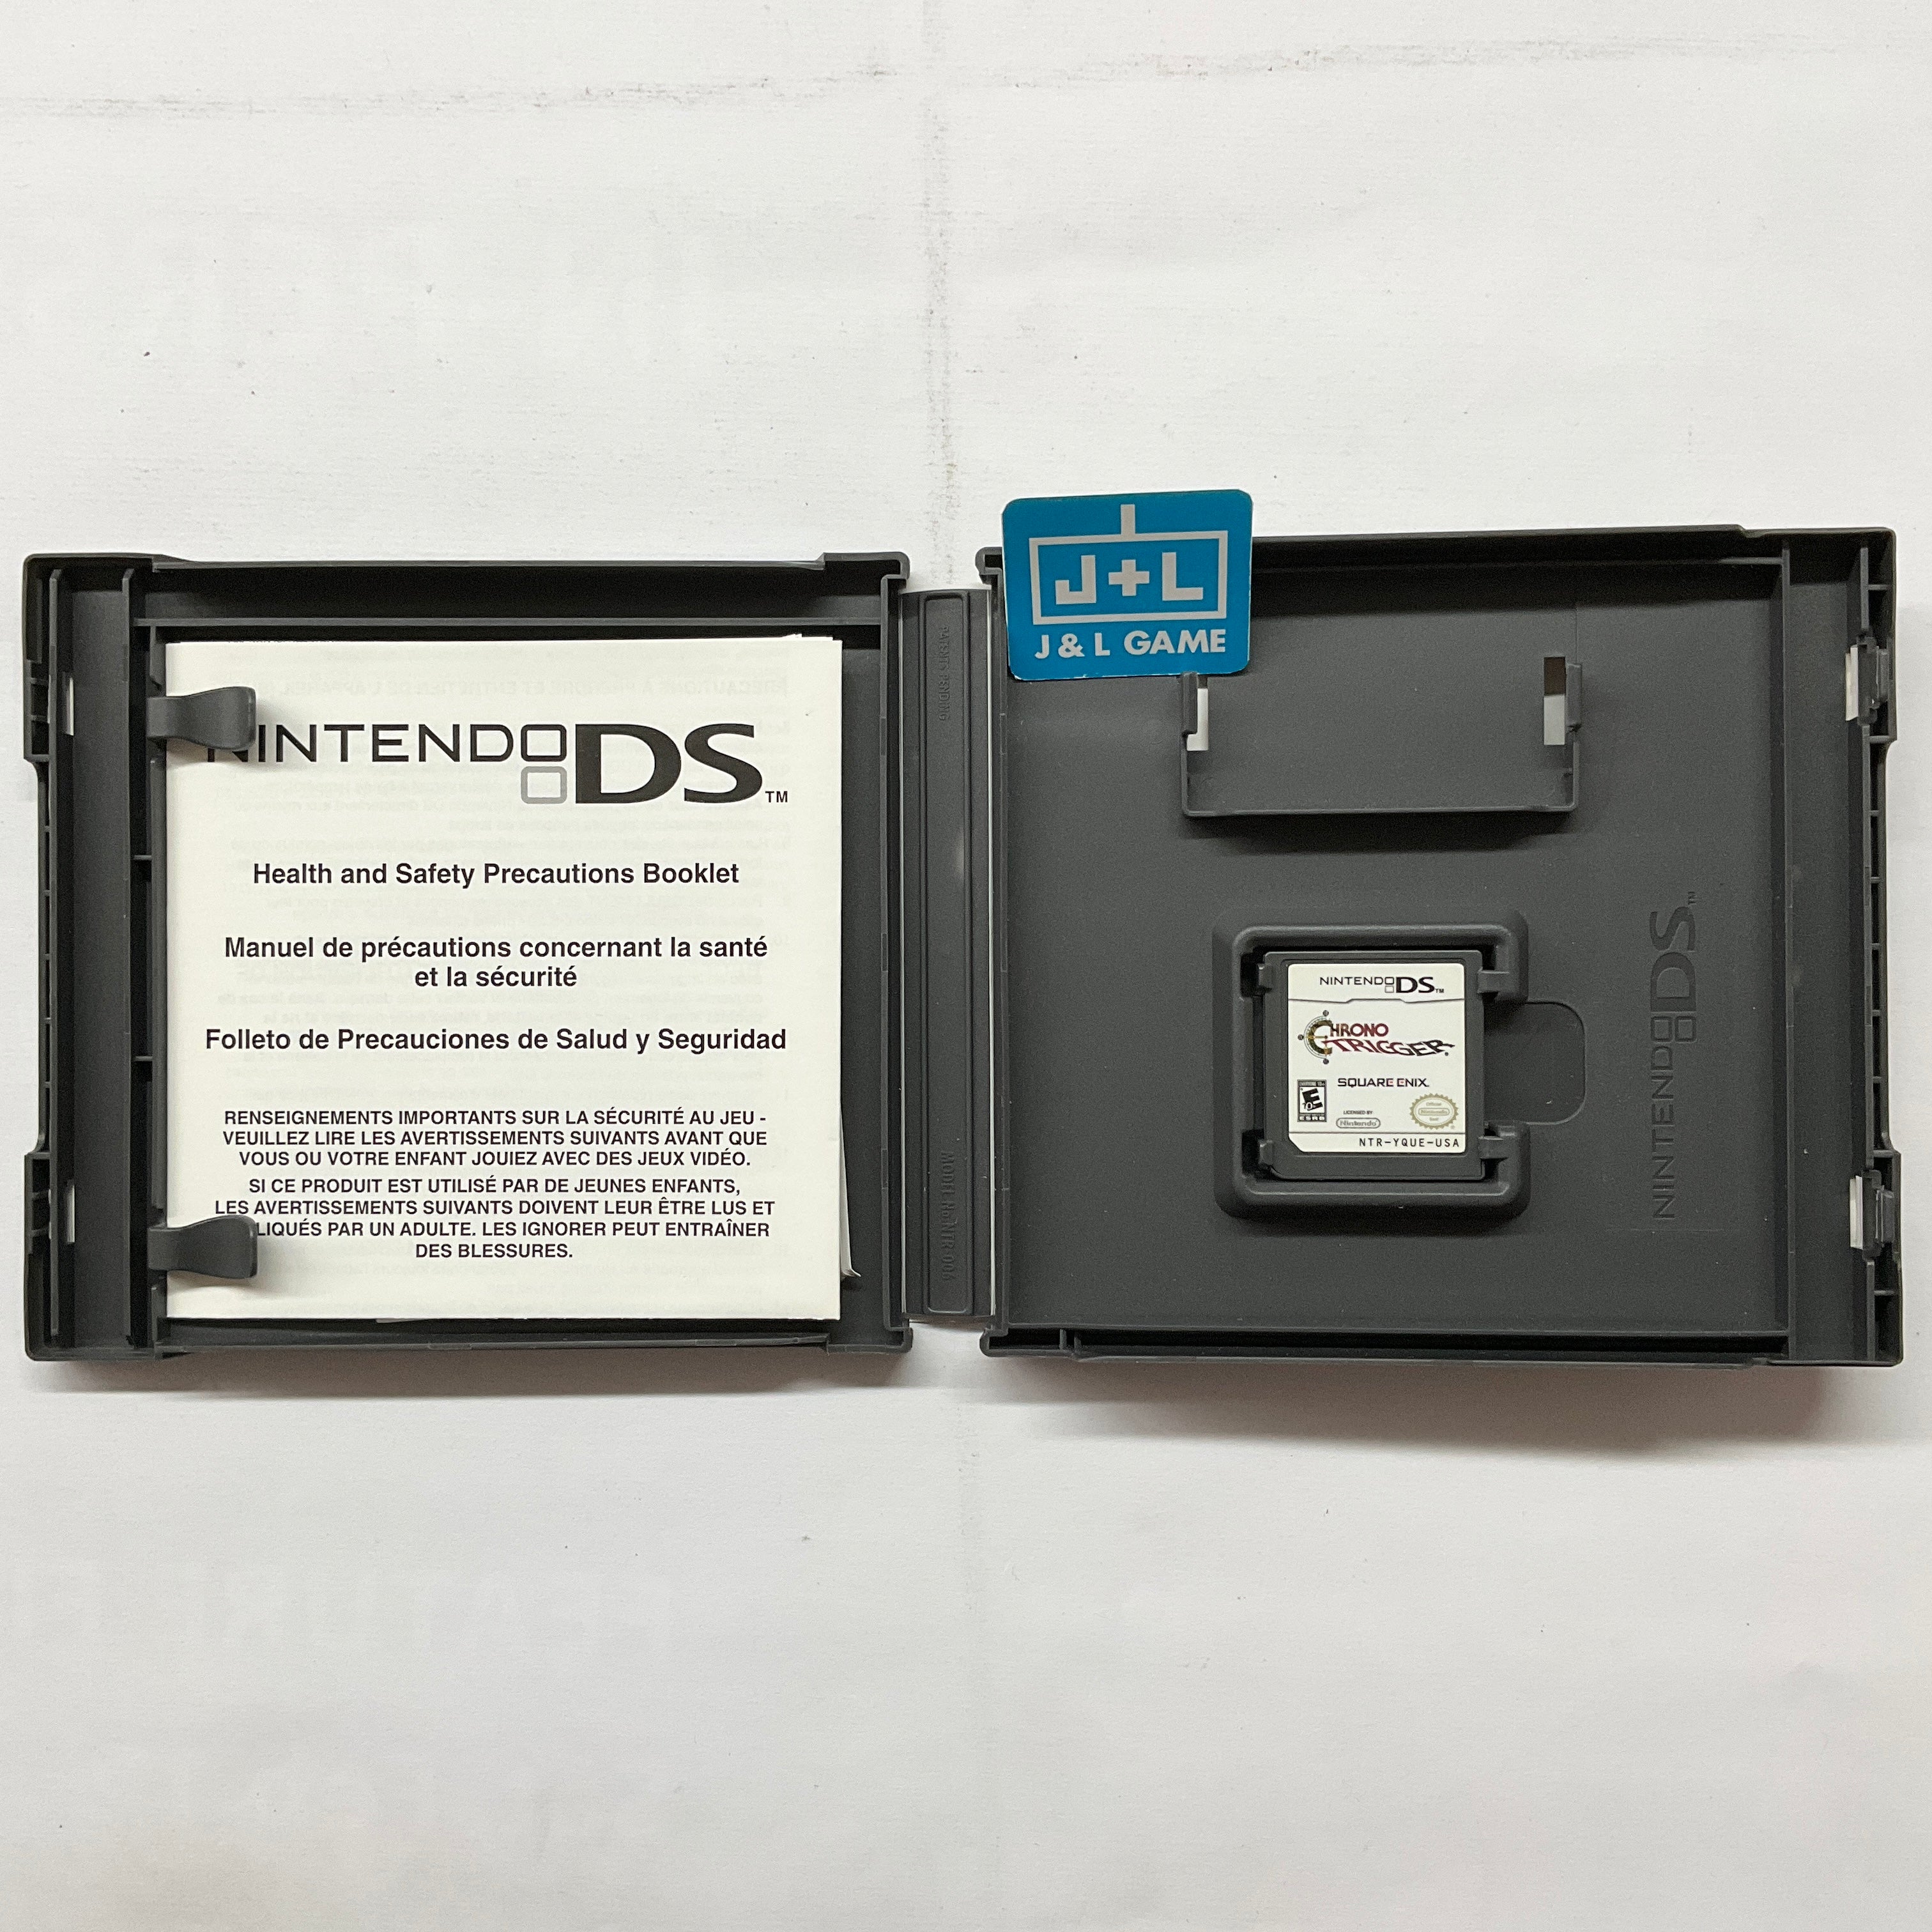 Chrono Trigger - (NDS) Nintendo DS [Pre-Owned] Video Games Square Enix   